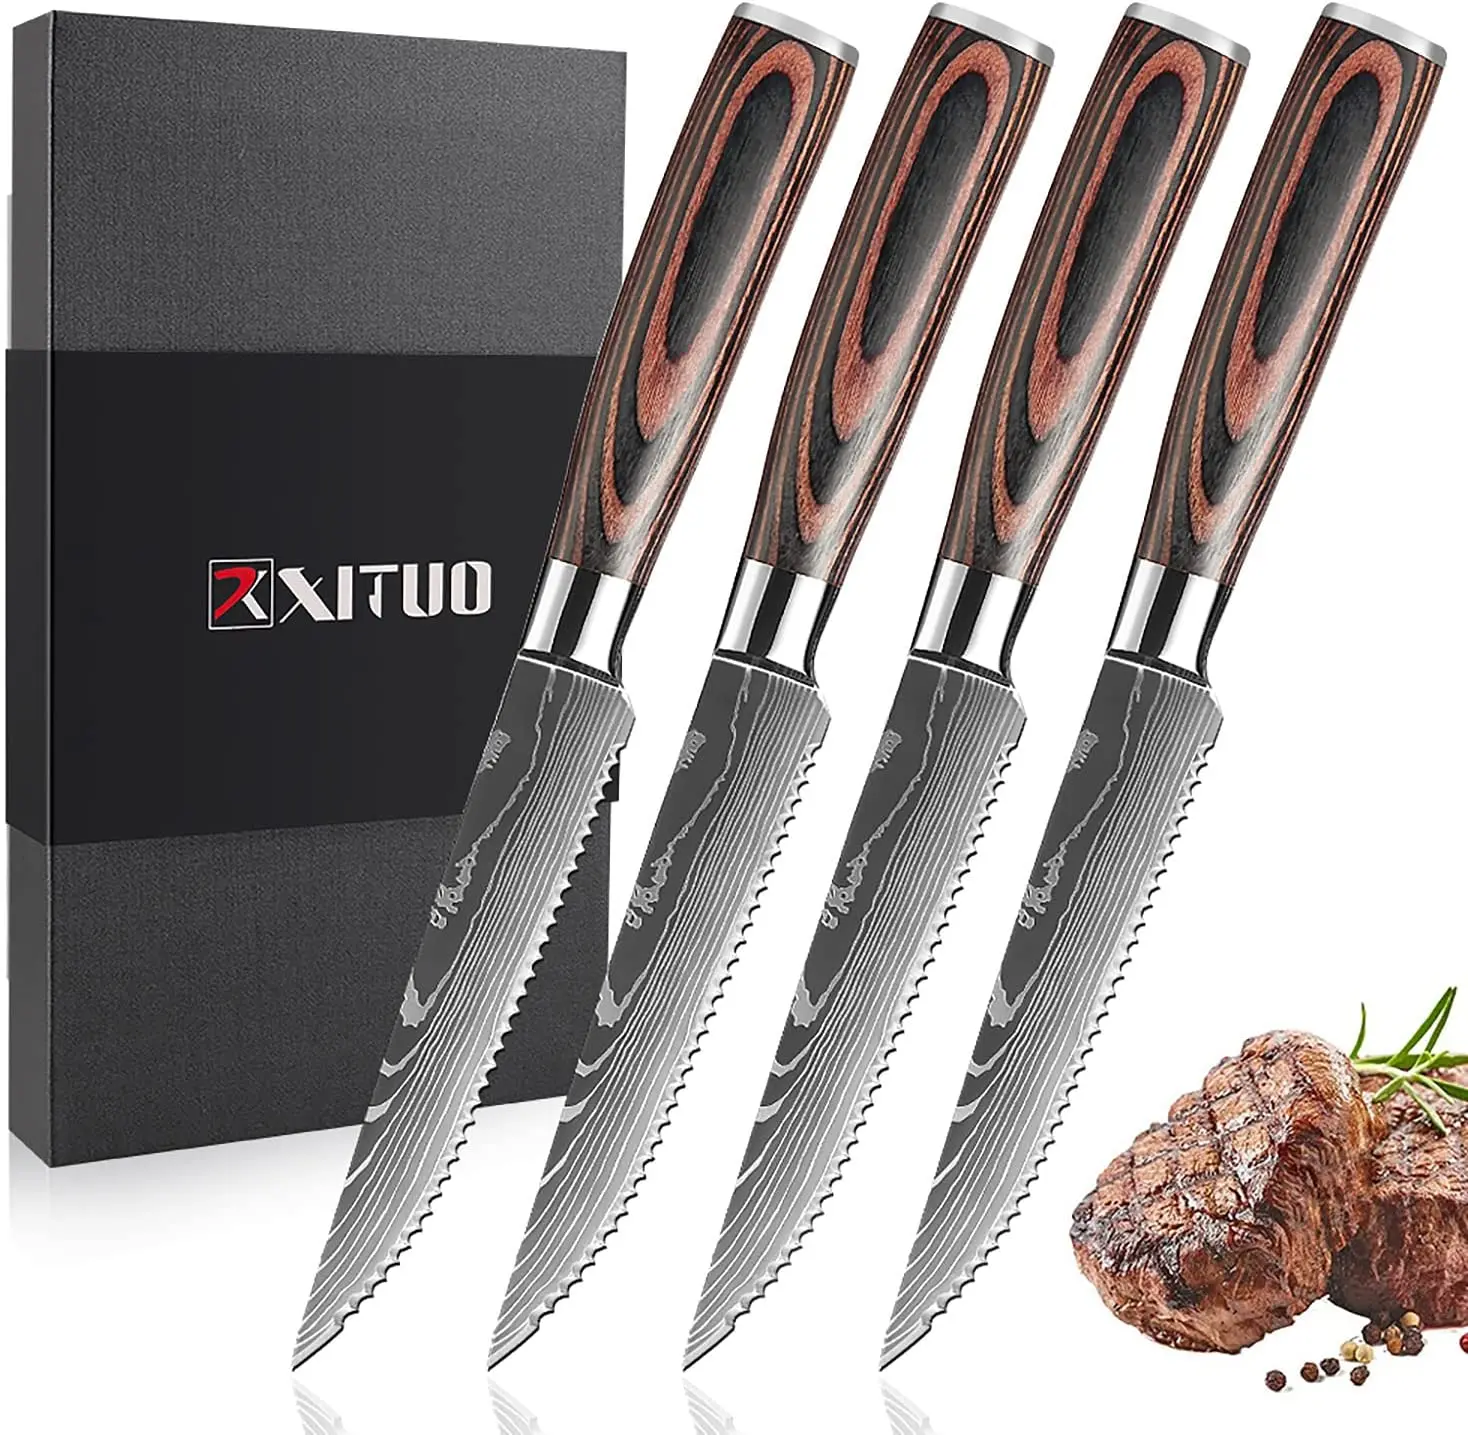 

XITUO 4/6 Pcs Steak Knives Set Sharp Serrated Blade Wood Handle Outdoor BBQ Picnic Meat Cutter Multi-function Fish Cutting Knife